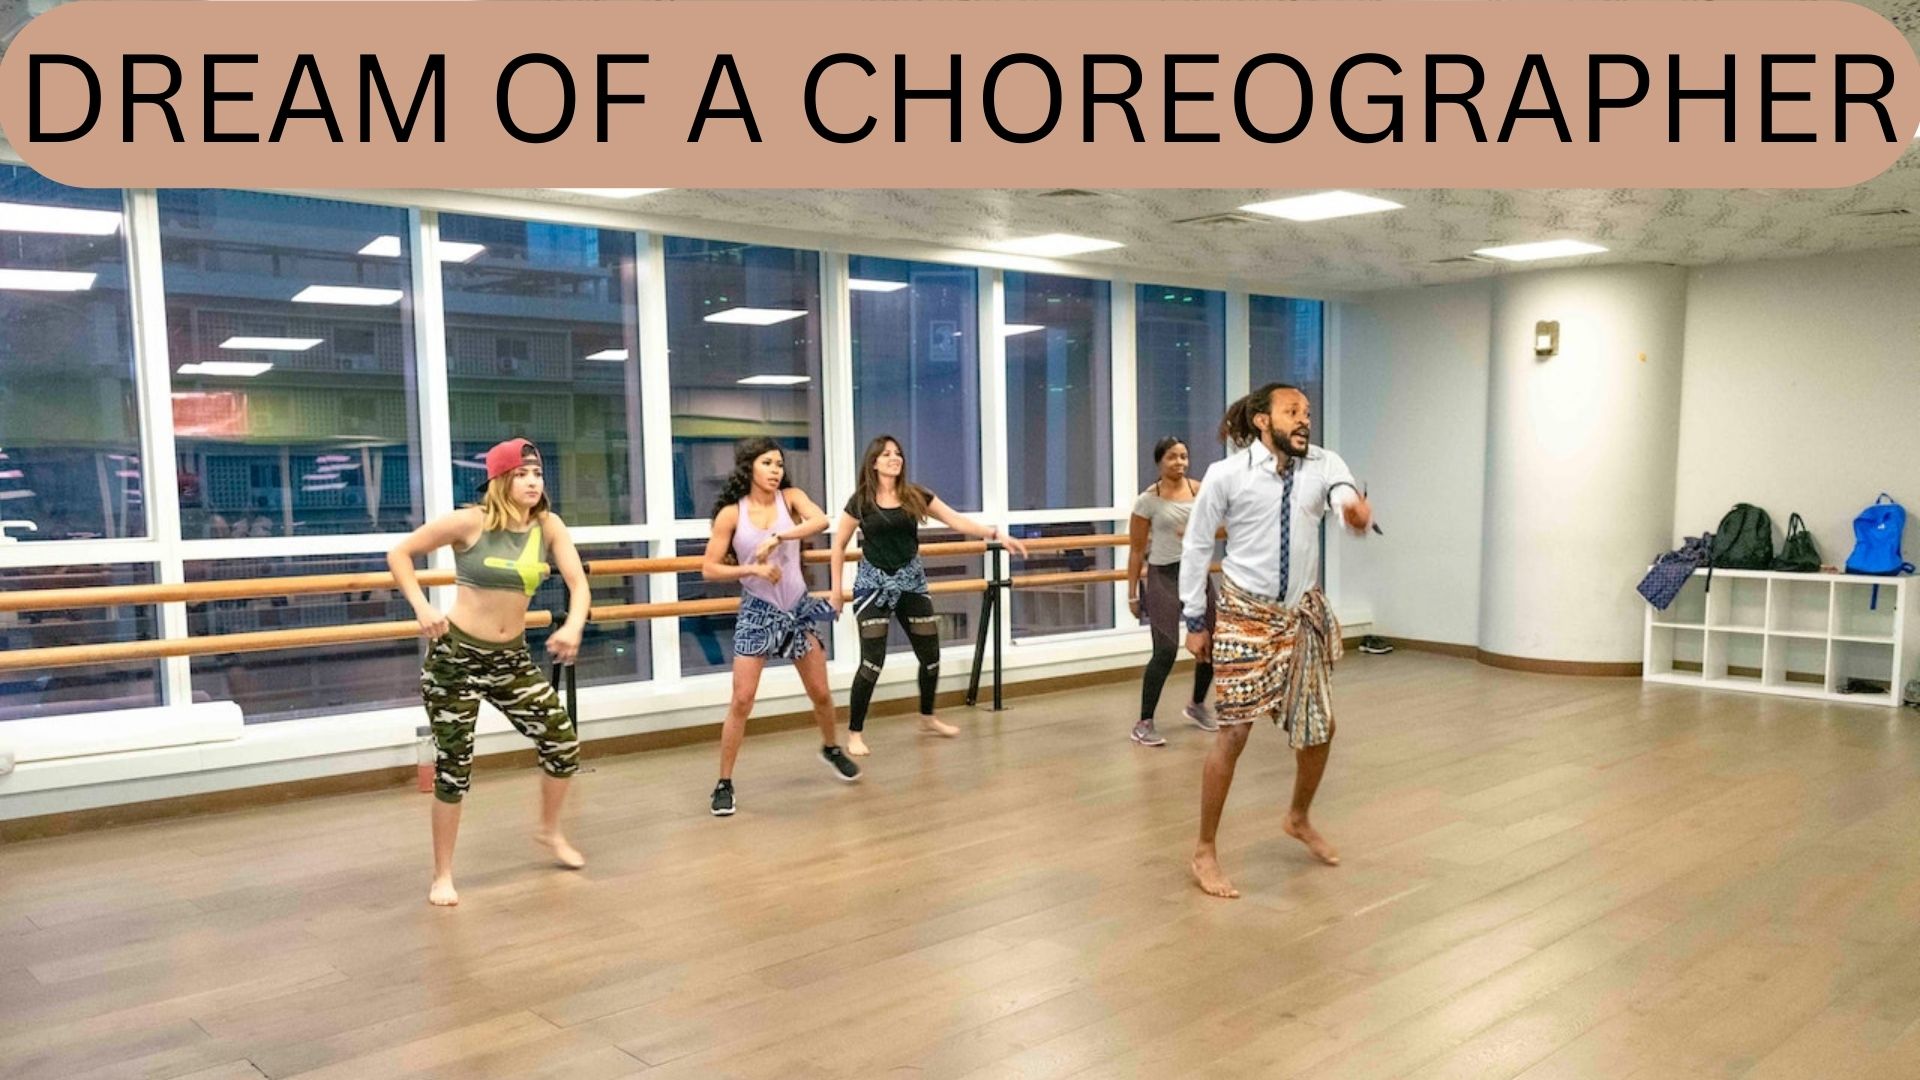 Dream Of A Choreographer - Stands For Freedom Of Expression